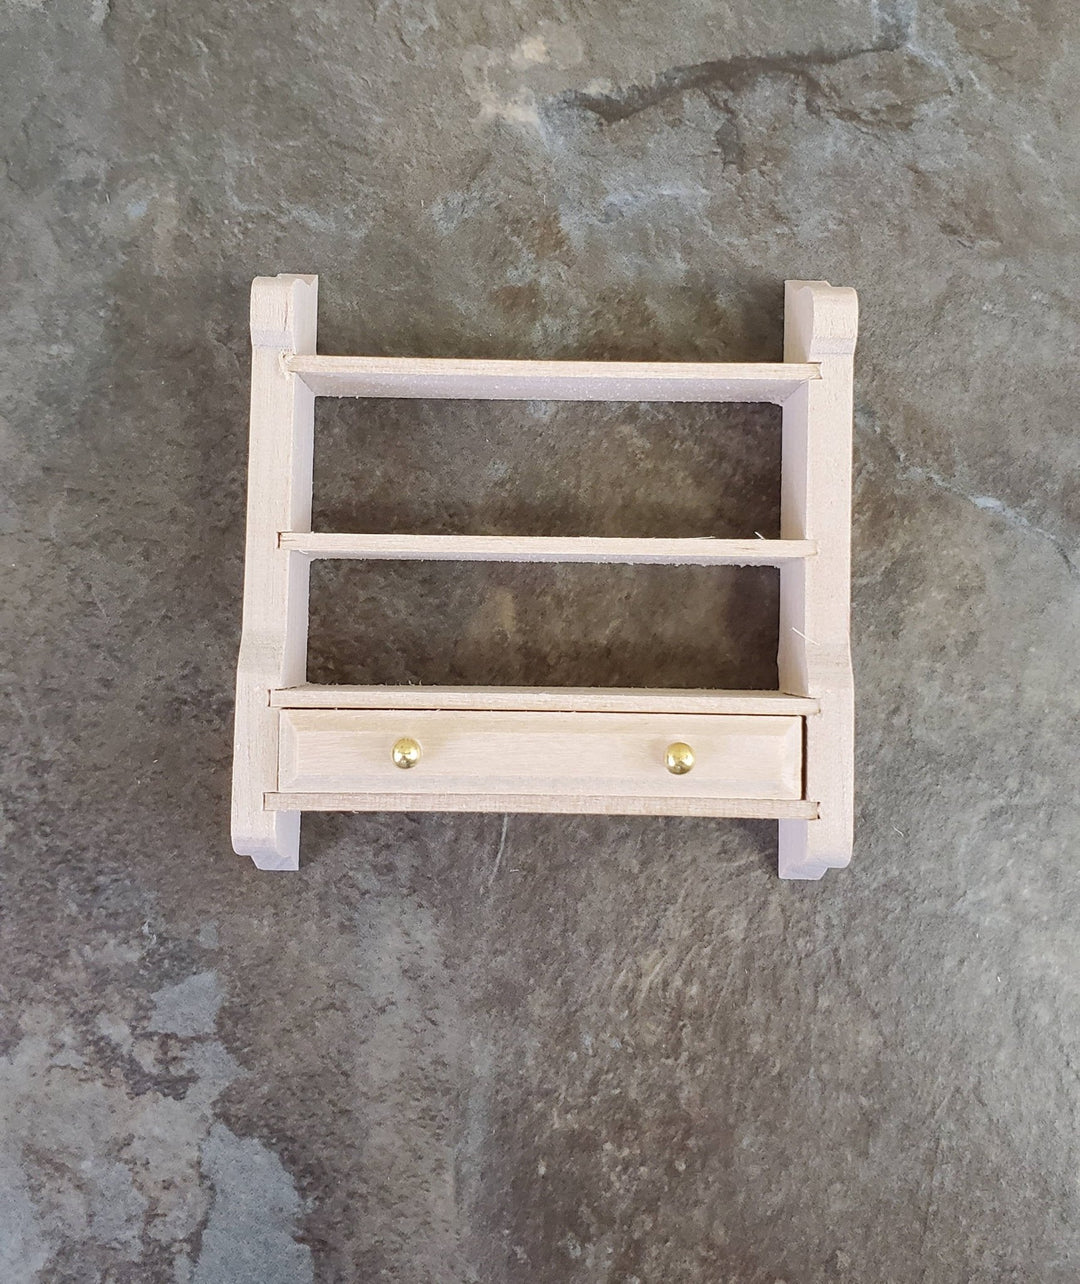 Dollhouse Miniature Hanging Shelf with Drawer 1:12 Scale Furniture Unpainted Wood - Miniature Crush